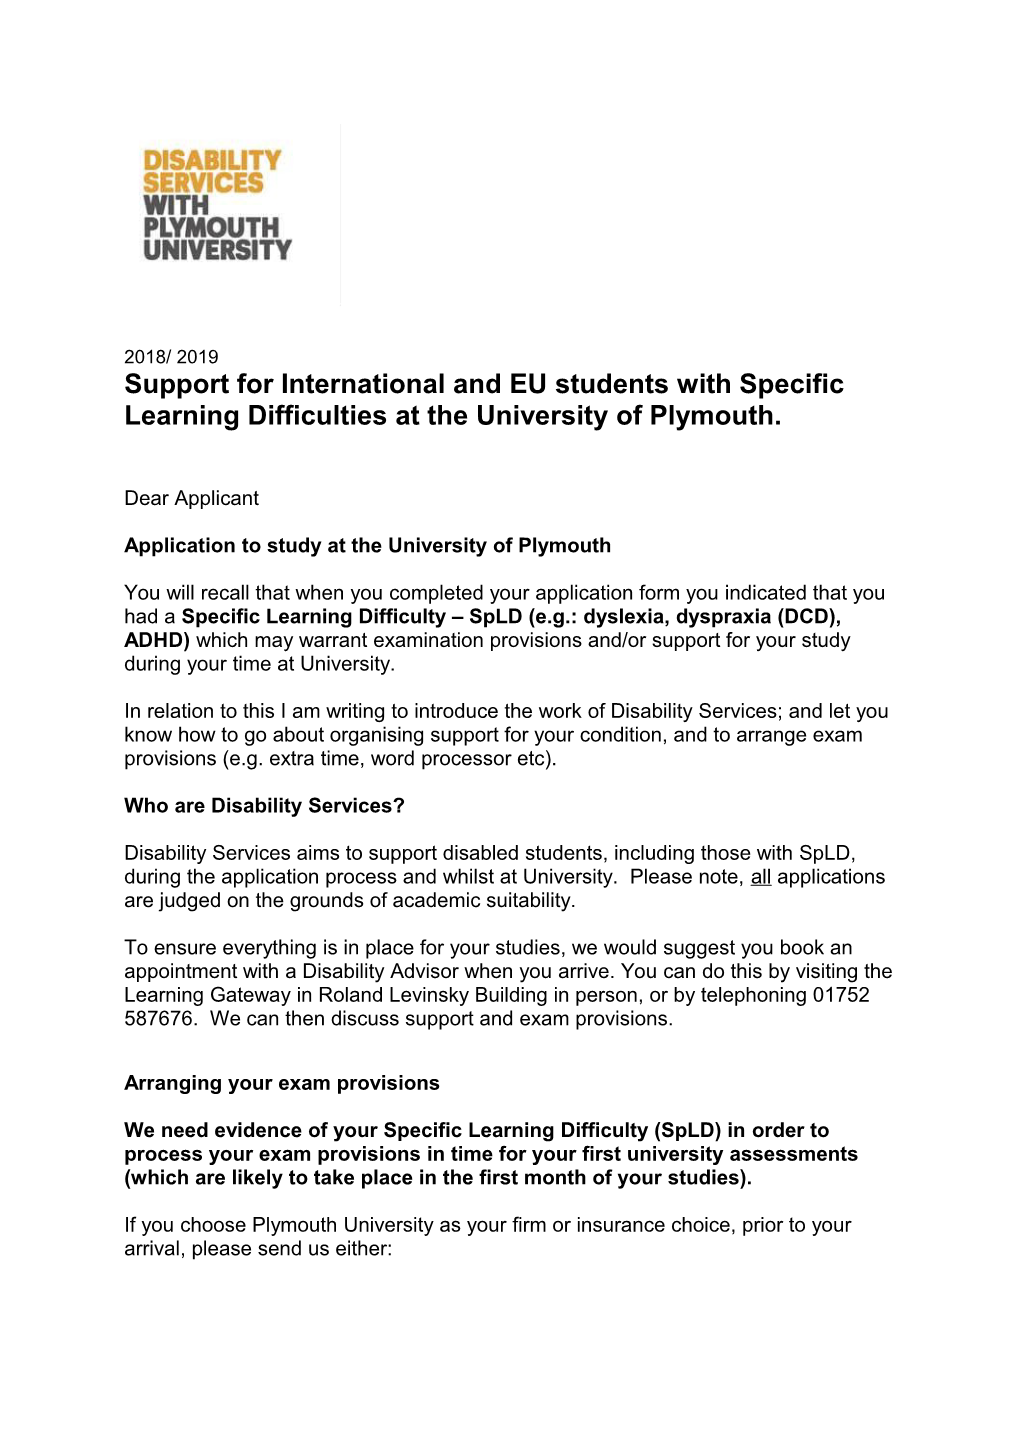 Application to Study at the University of Plymouth